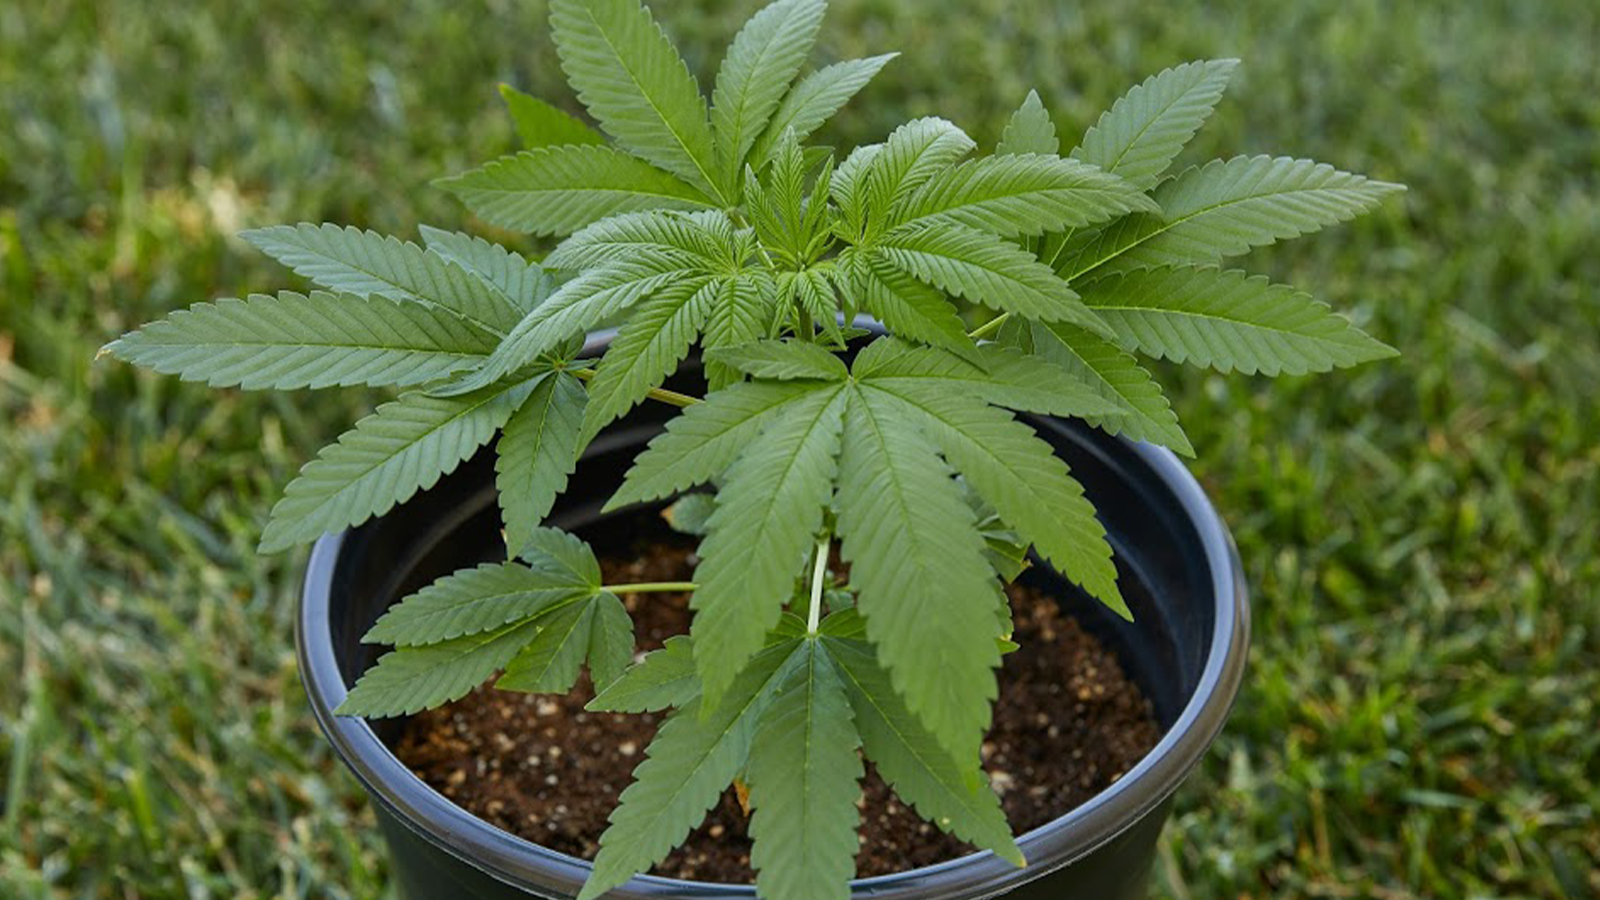 How to grow good weed outdoors step by step